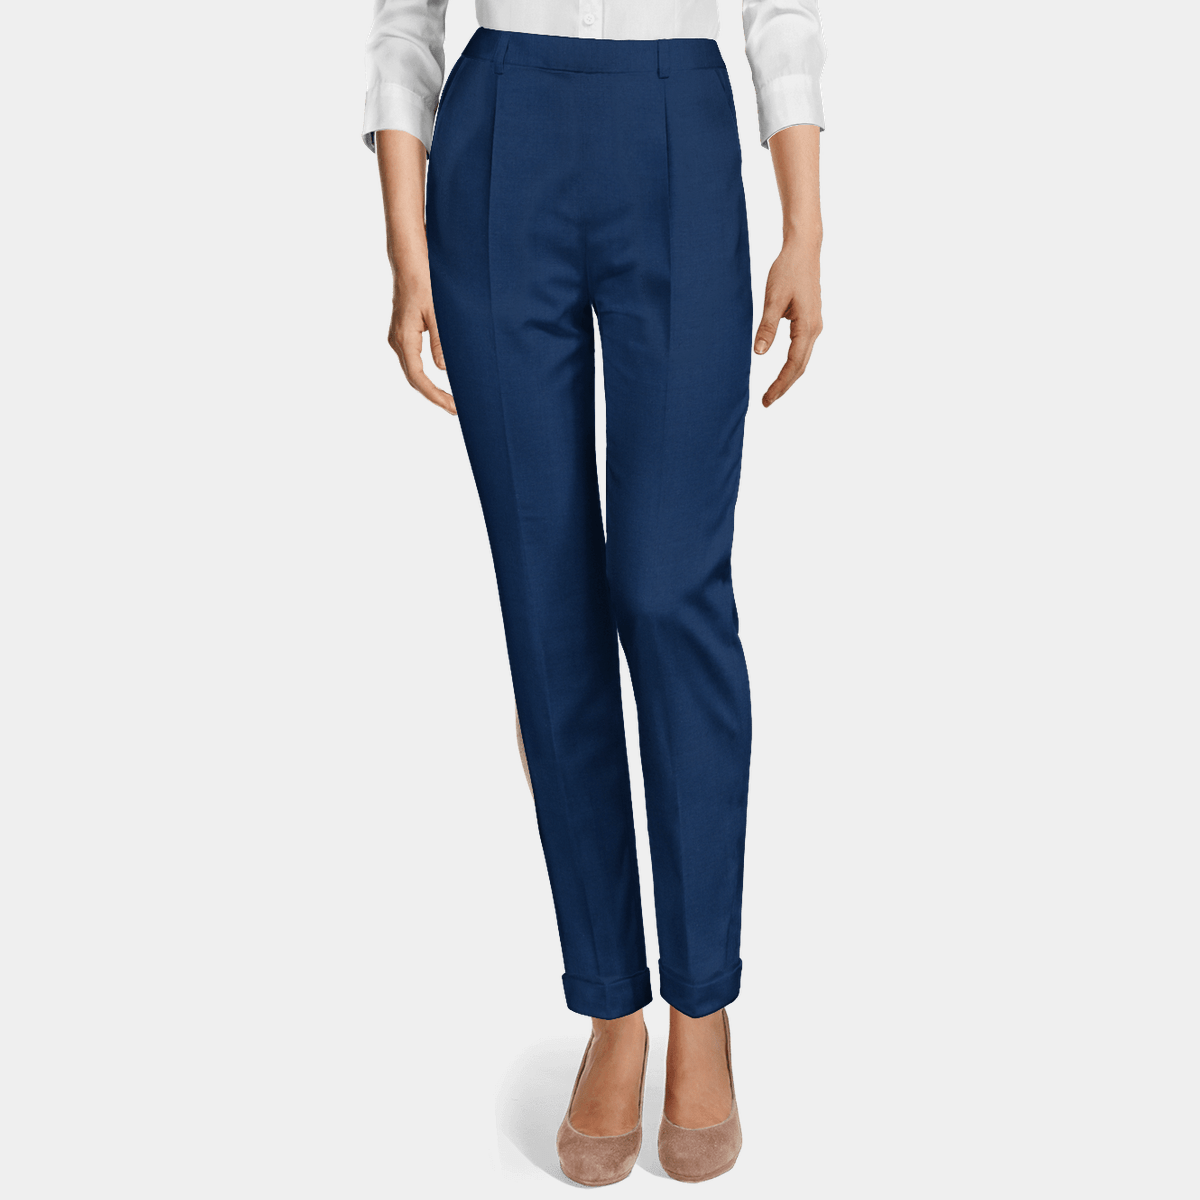 Peter Storm Women's Stretch Double Zip Off Trousers - Long